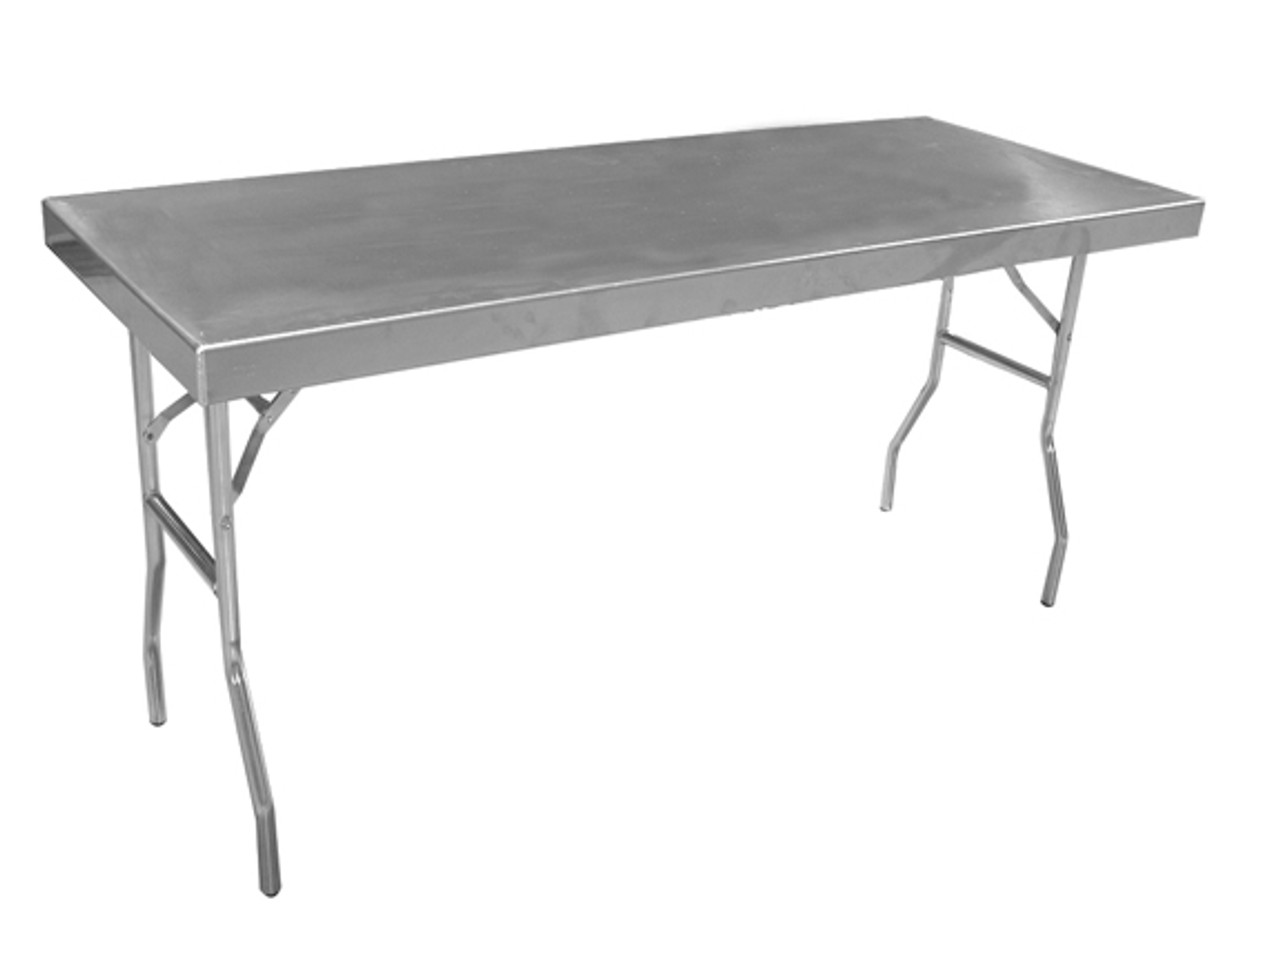 Aluminum Work Table | Large 72"W x 31"D (Free Shipping Does Not Apply)